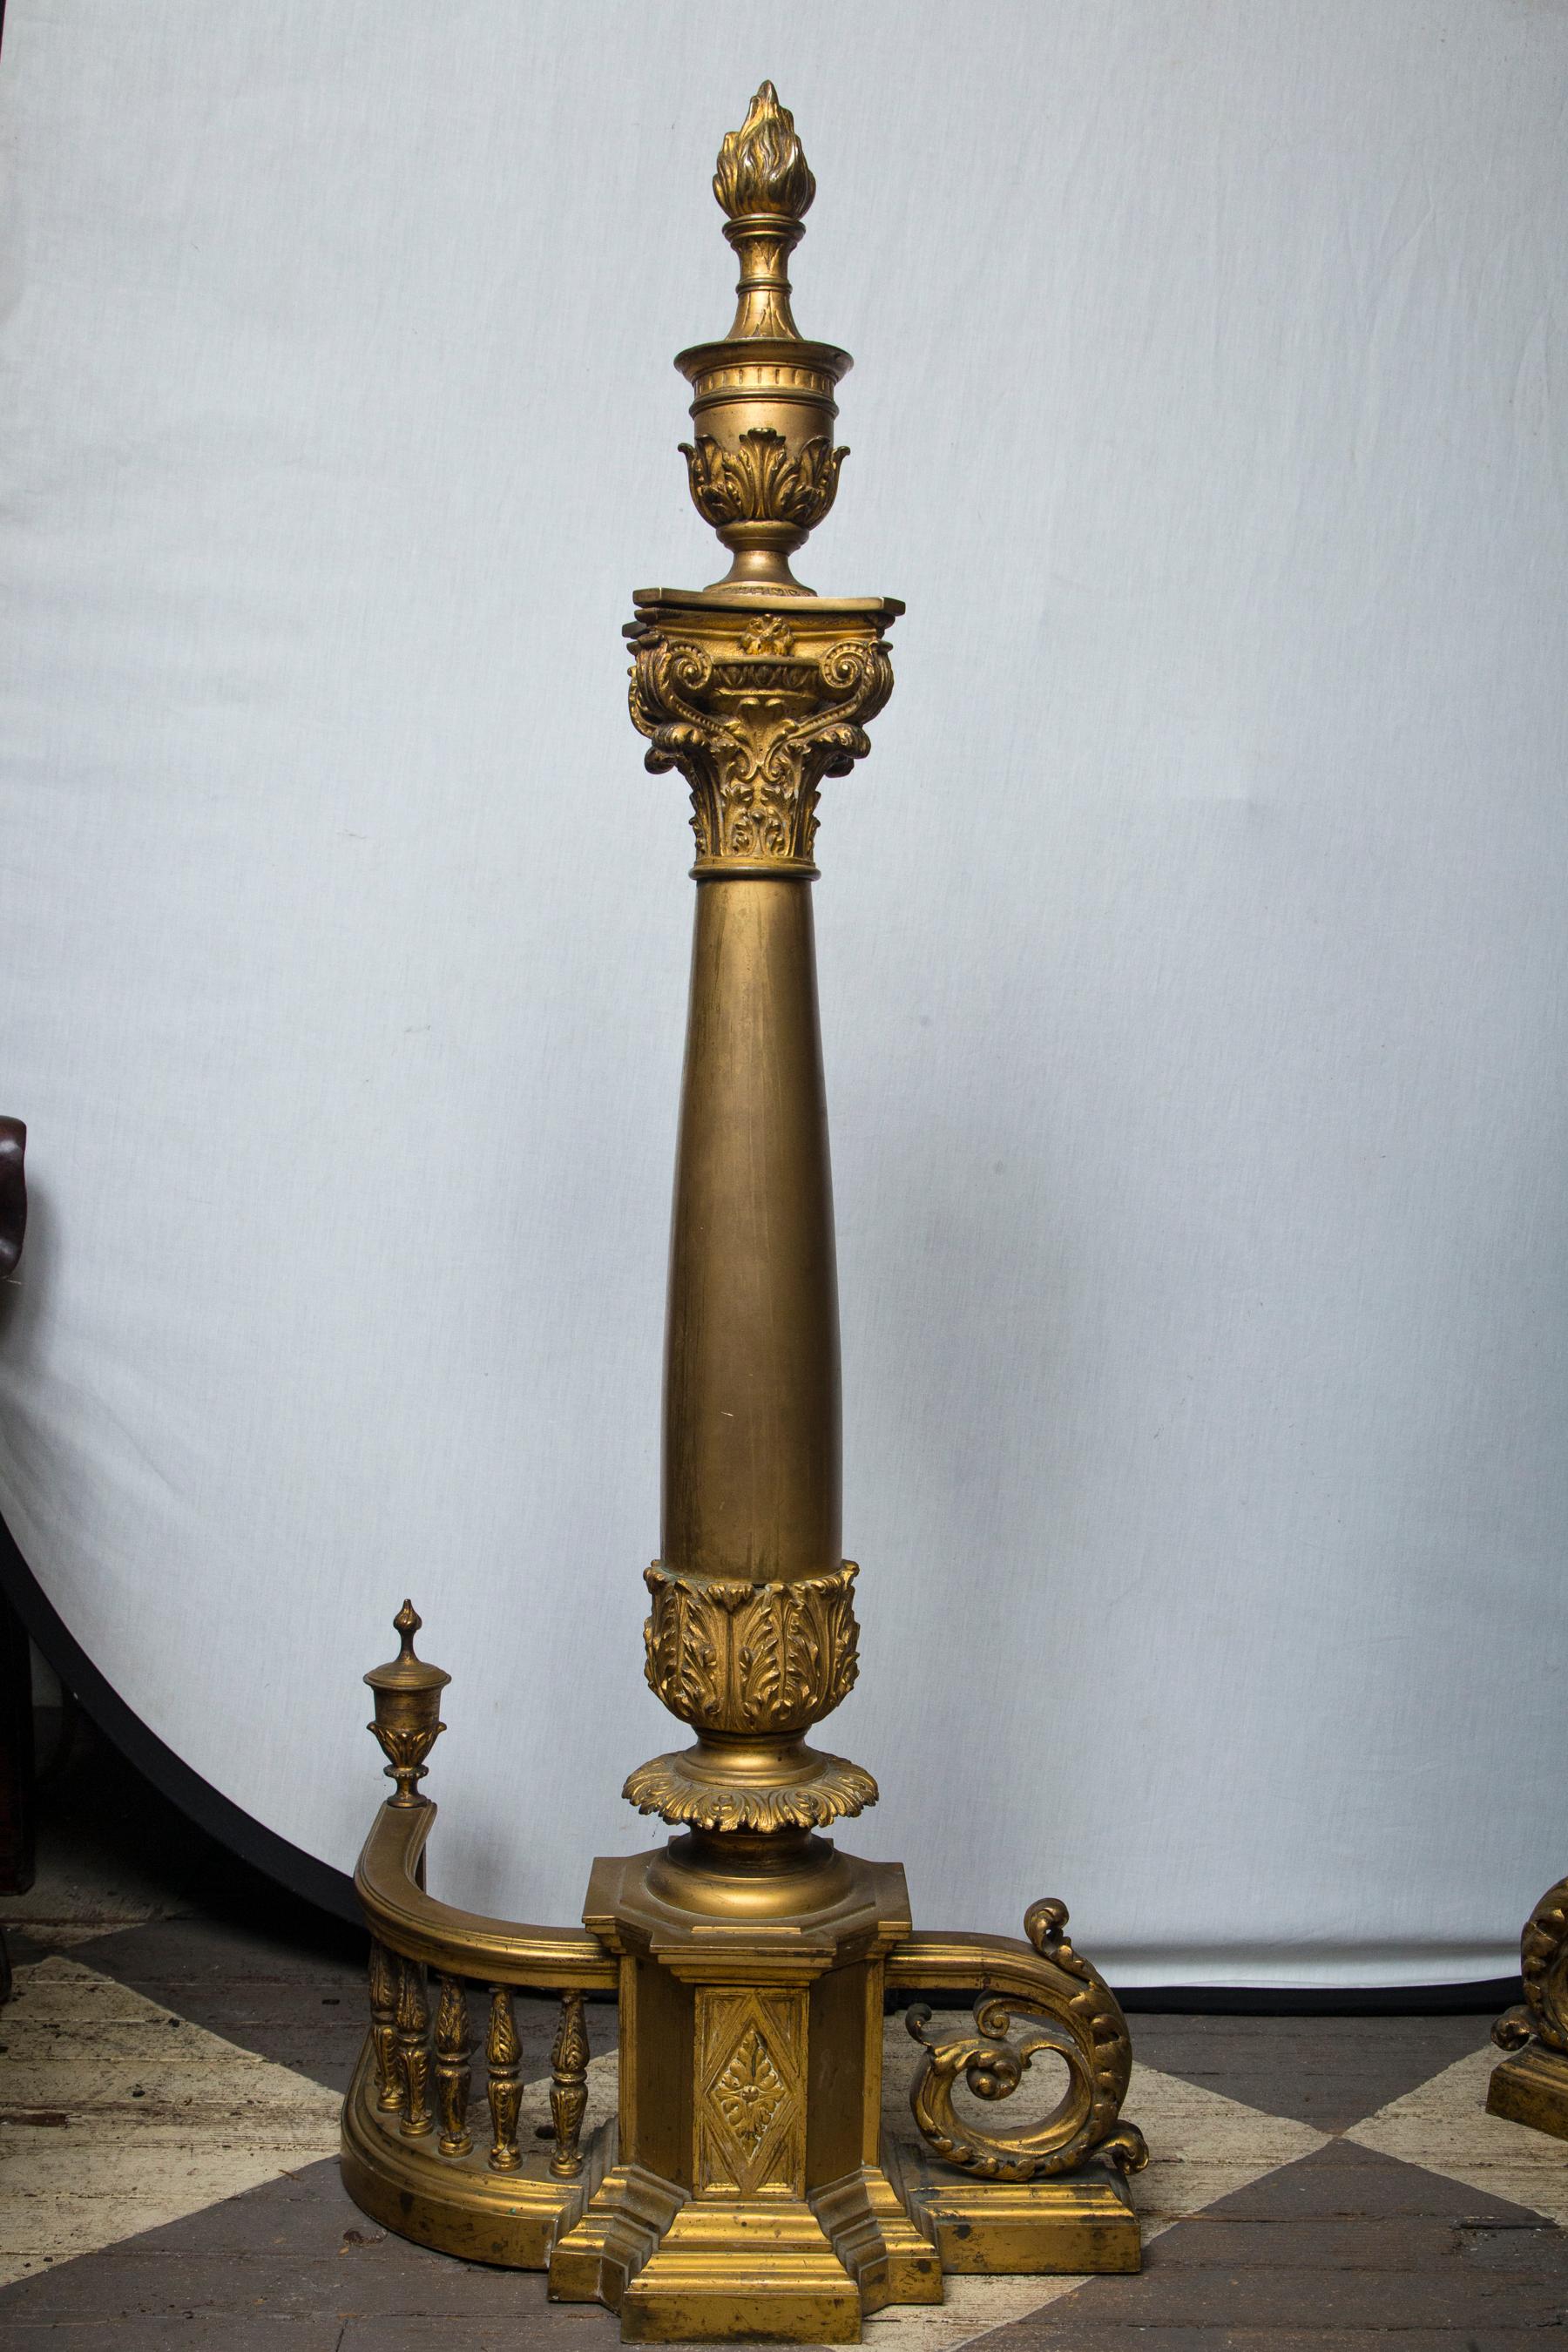 Baluster gate base that is 7.5 inches tall, centered by an 8 sided element that is decorated with a large diamond shape surrounding aa acanthus leaf design. Thick central column topped by a Corinthian capital which, in turn, is topped by a flame